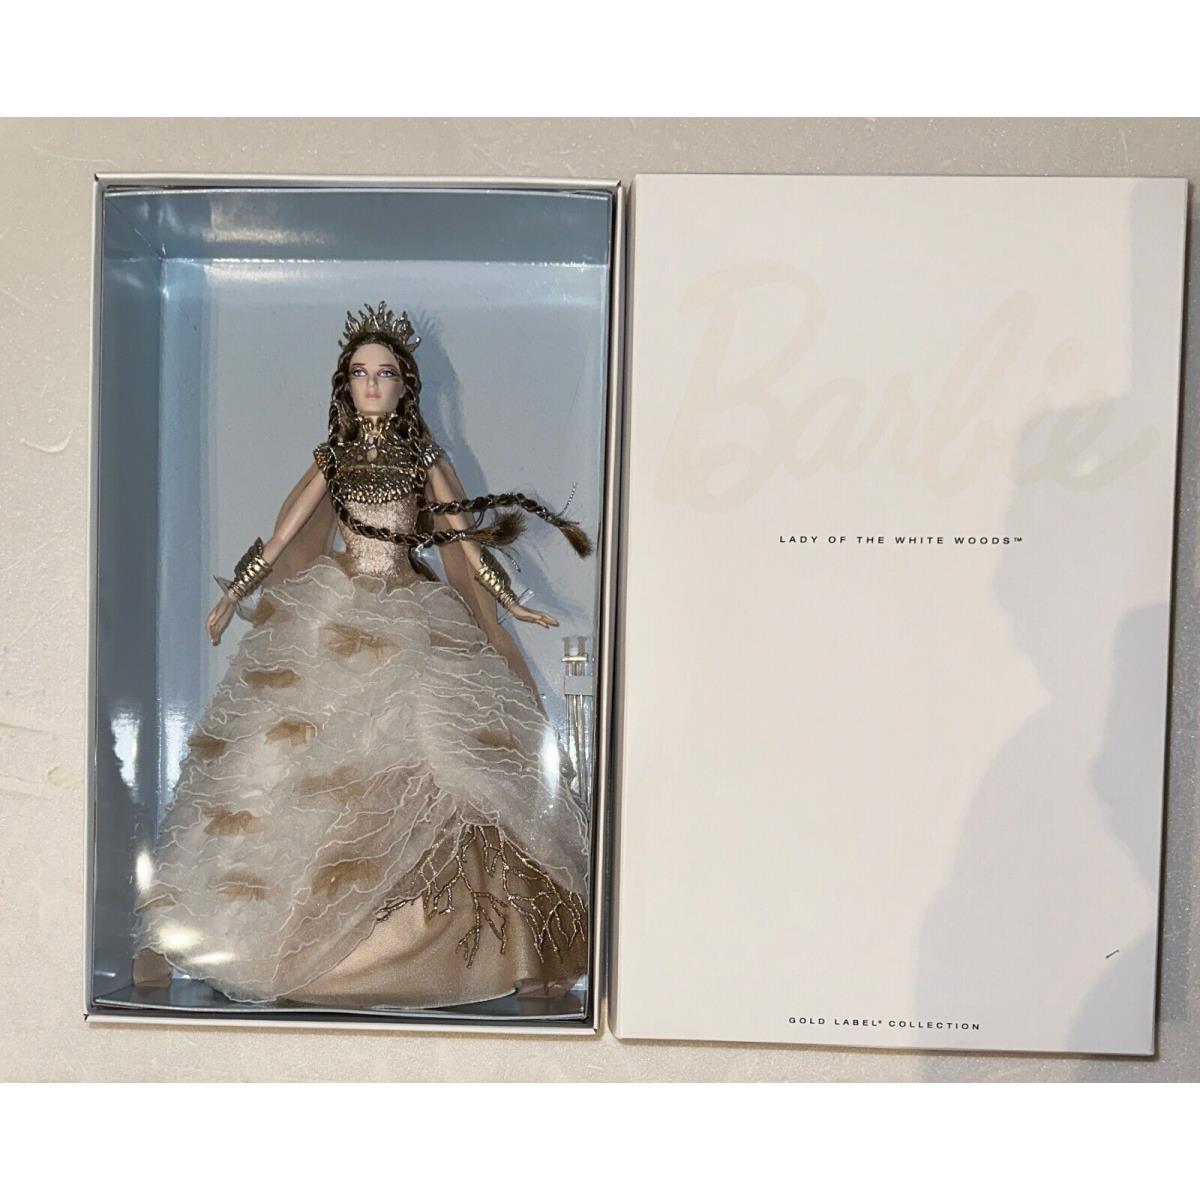 Faraway Forest Lady of The White Woods Barbie Gold Label Mattel Nrfb in Shipper